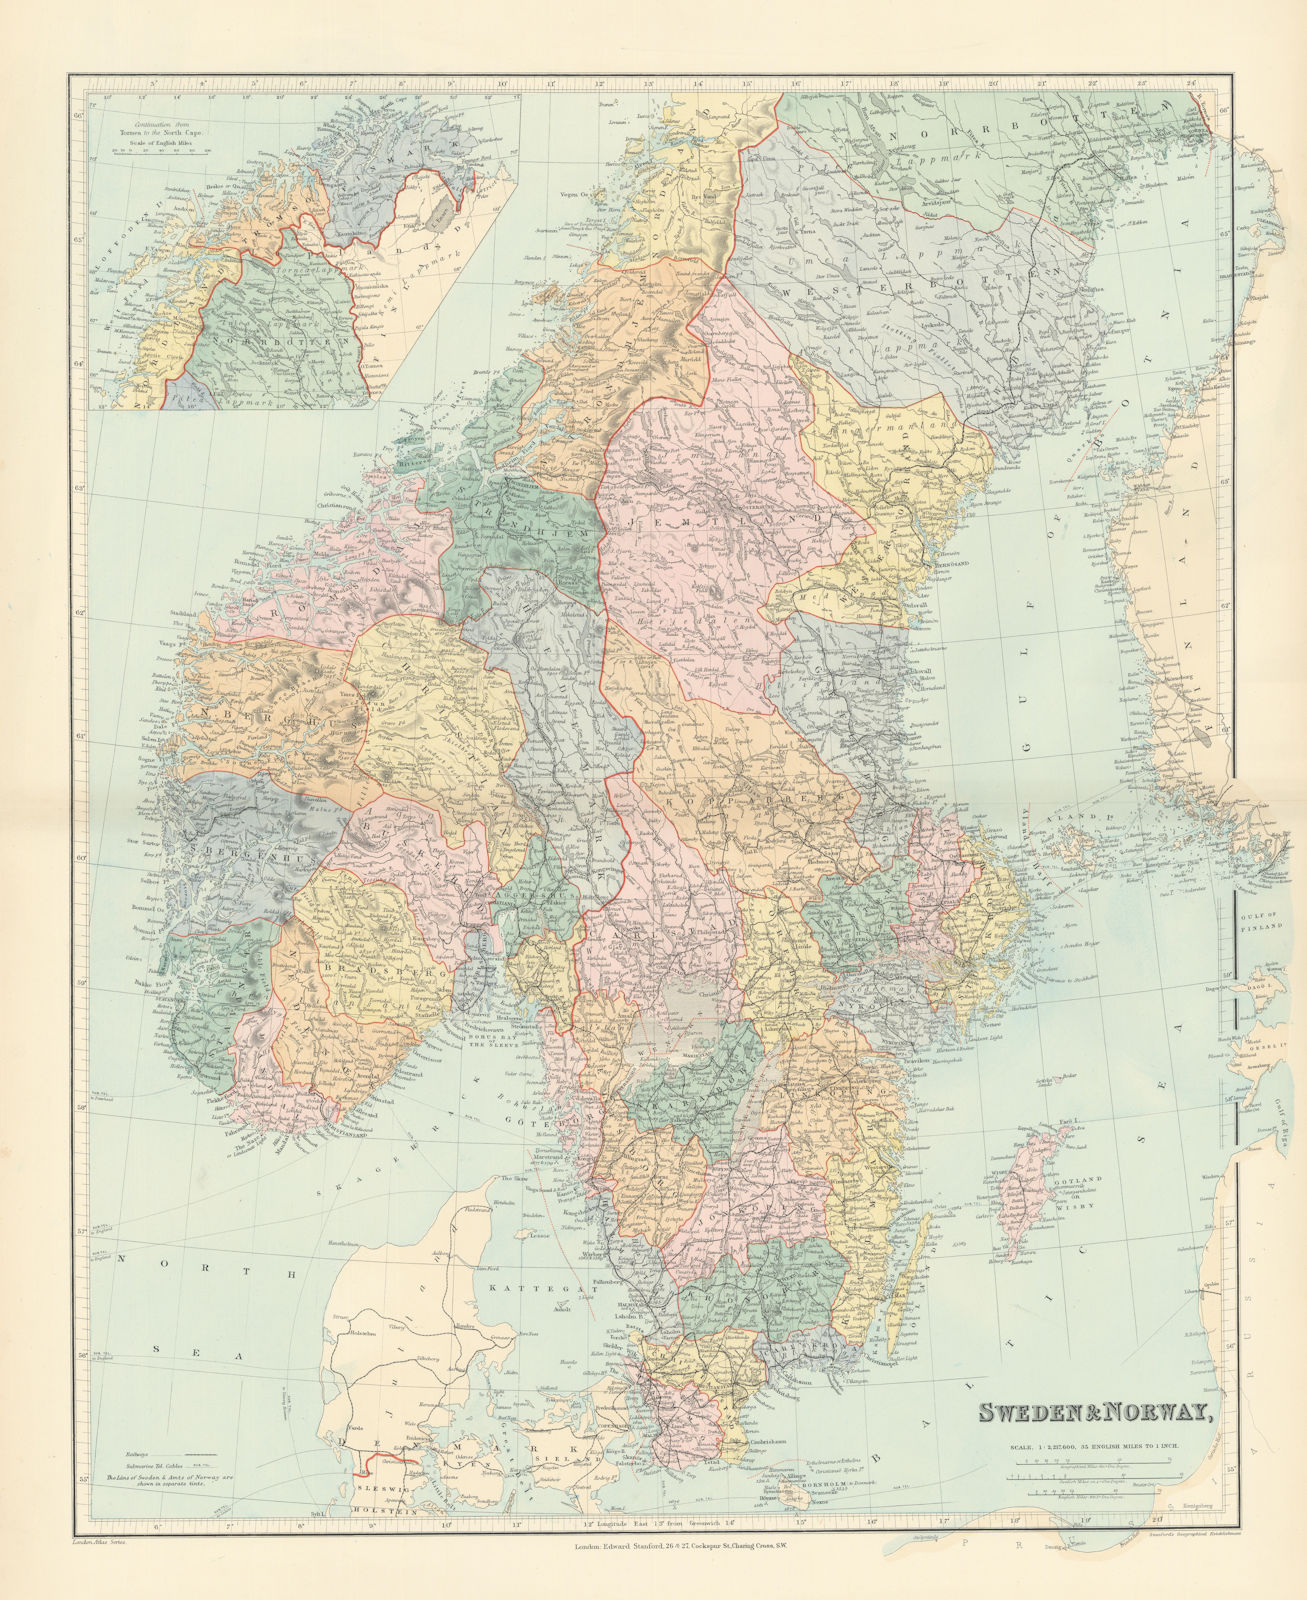 Associate Product Scandinavia physical mountains fjords glaciers. Sweden Norway. STANFORD 1896 map